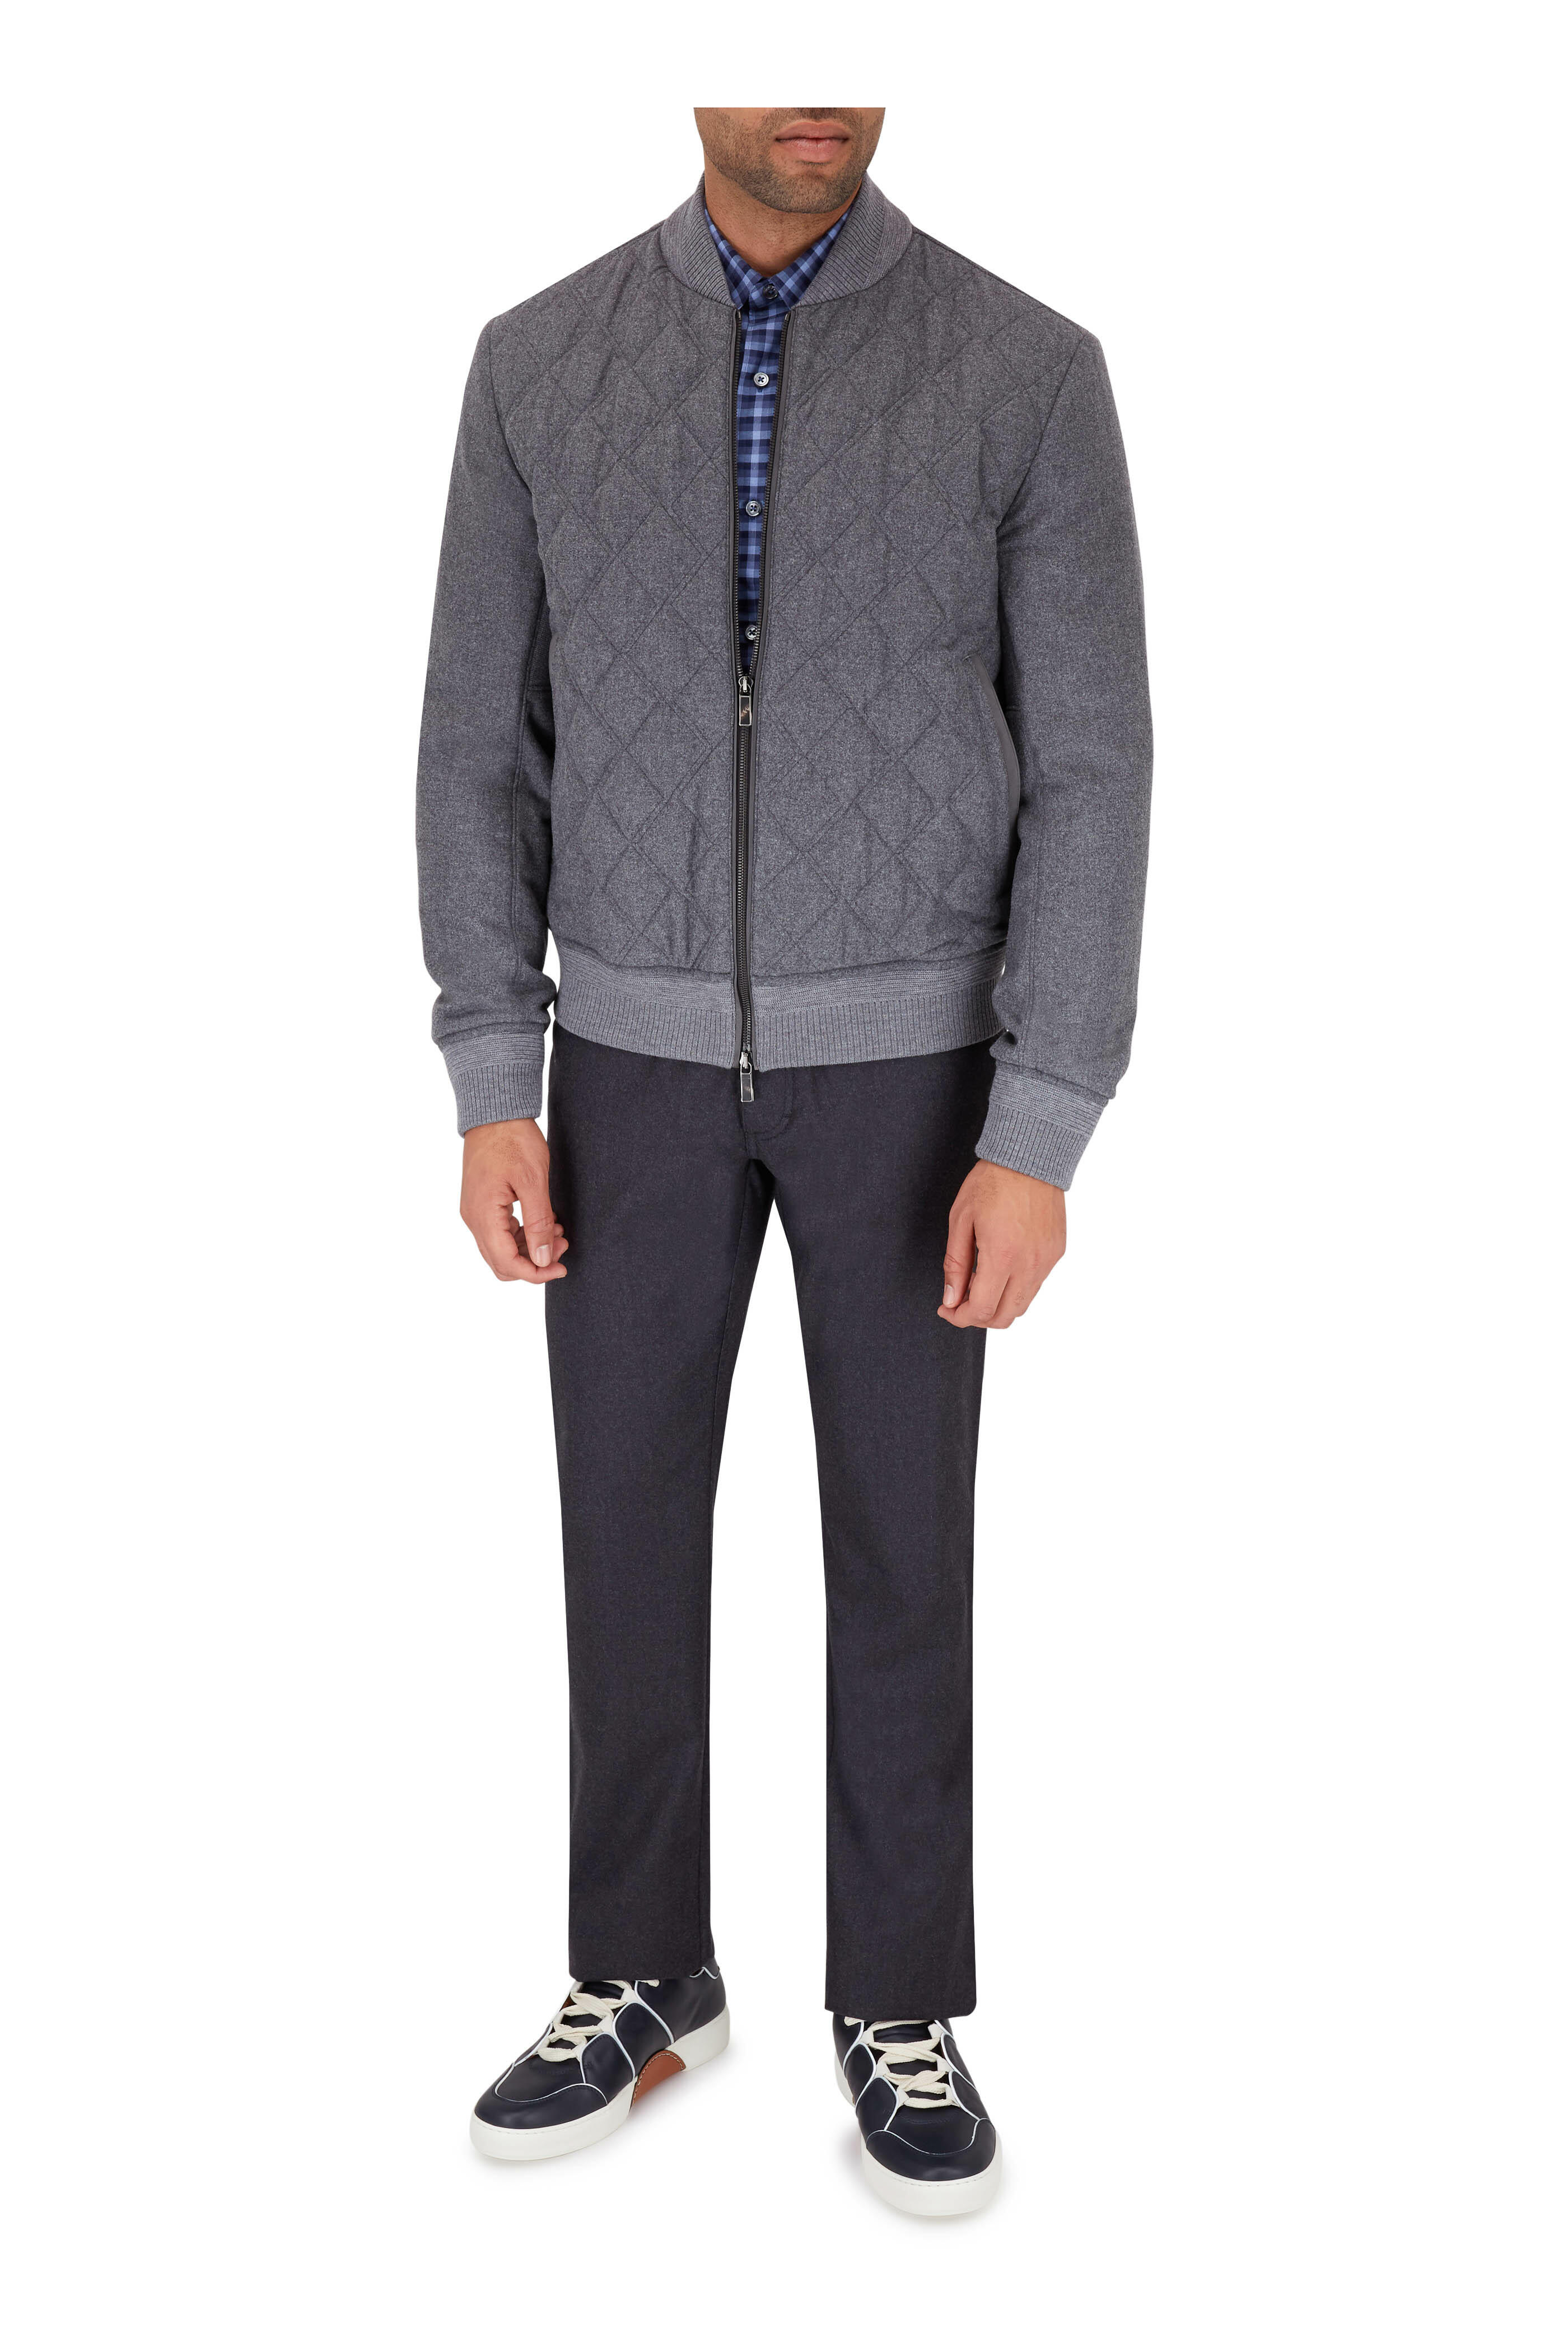 Zegna - Gray Wool, Silk & Cashmere Quilted Bomber Jacket